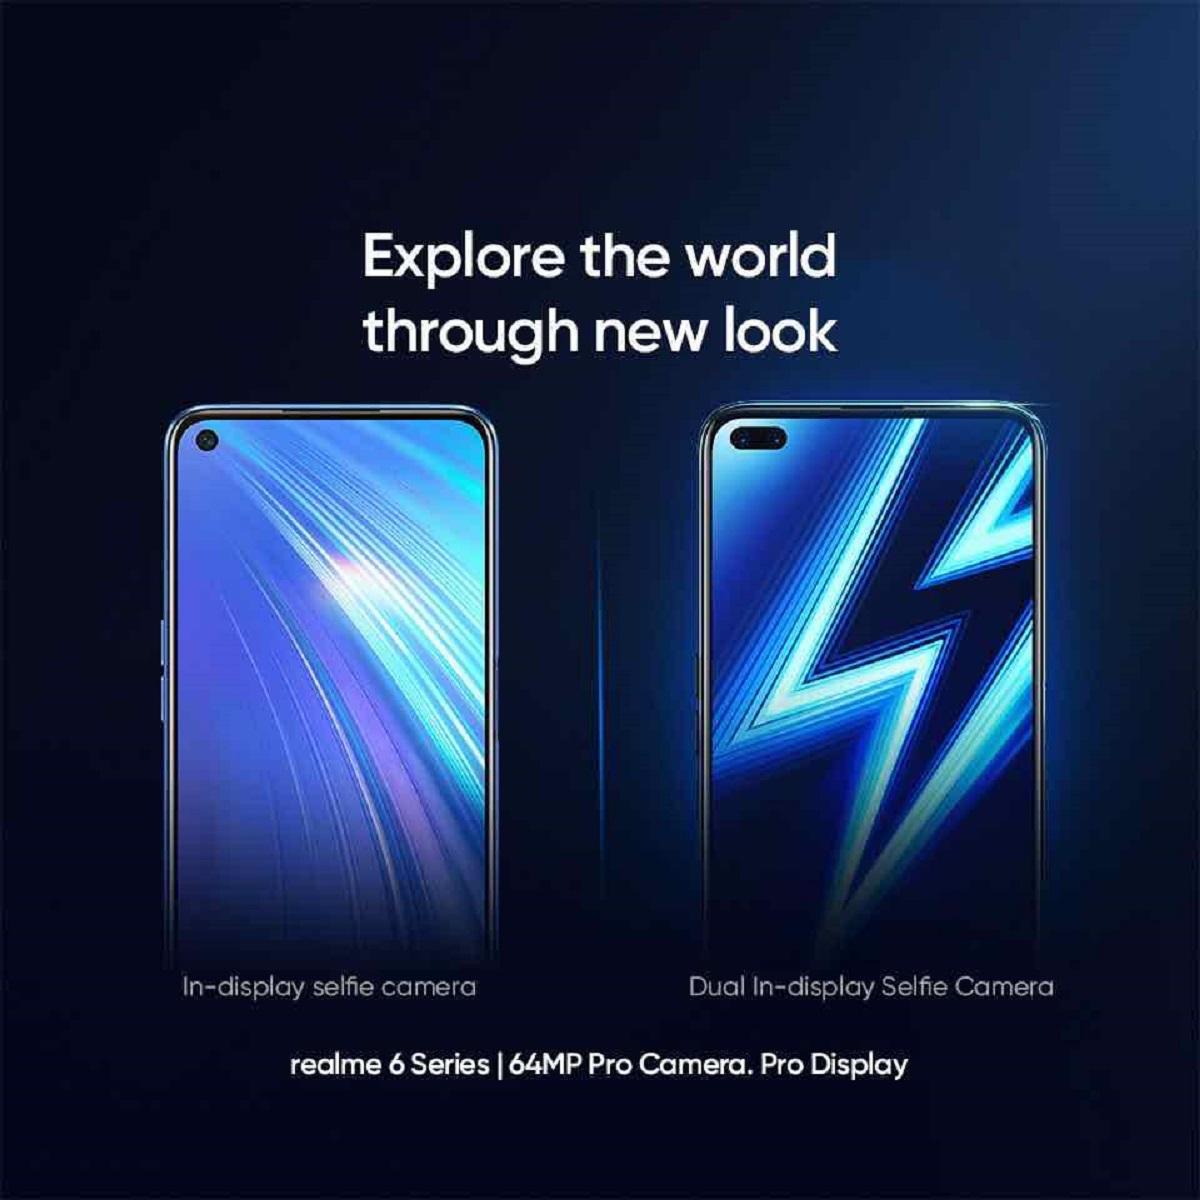 real fans get ready realme 6 Pro, realme 6 set to launch in Pakistan next week